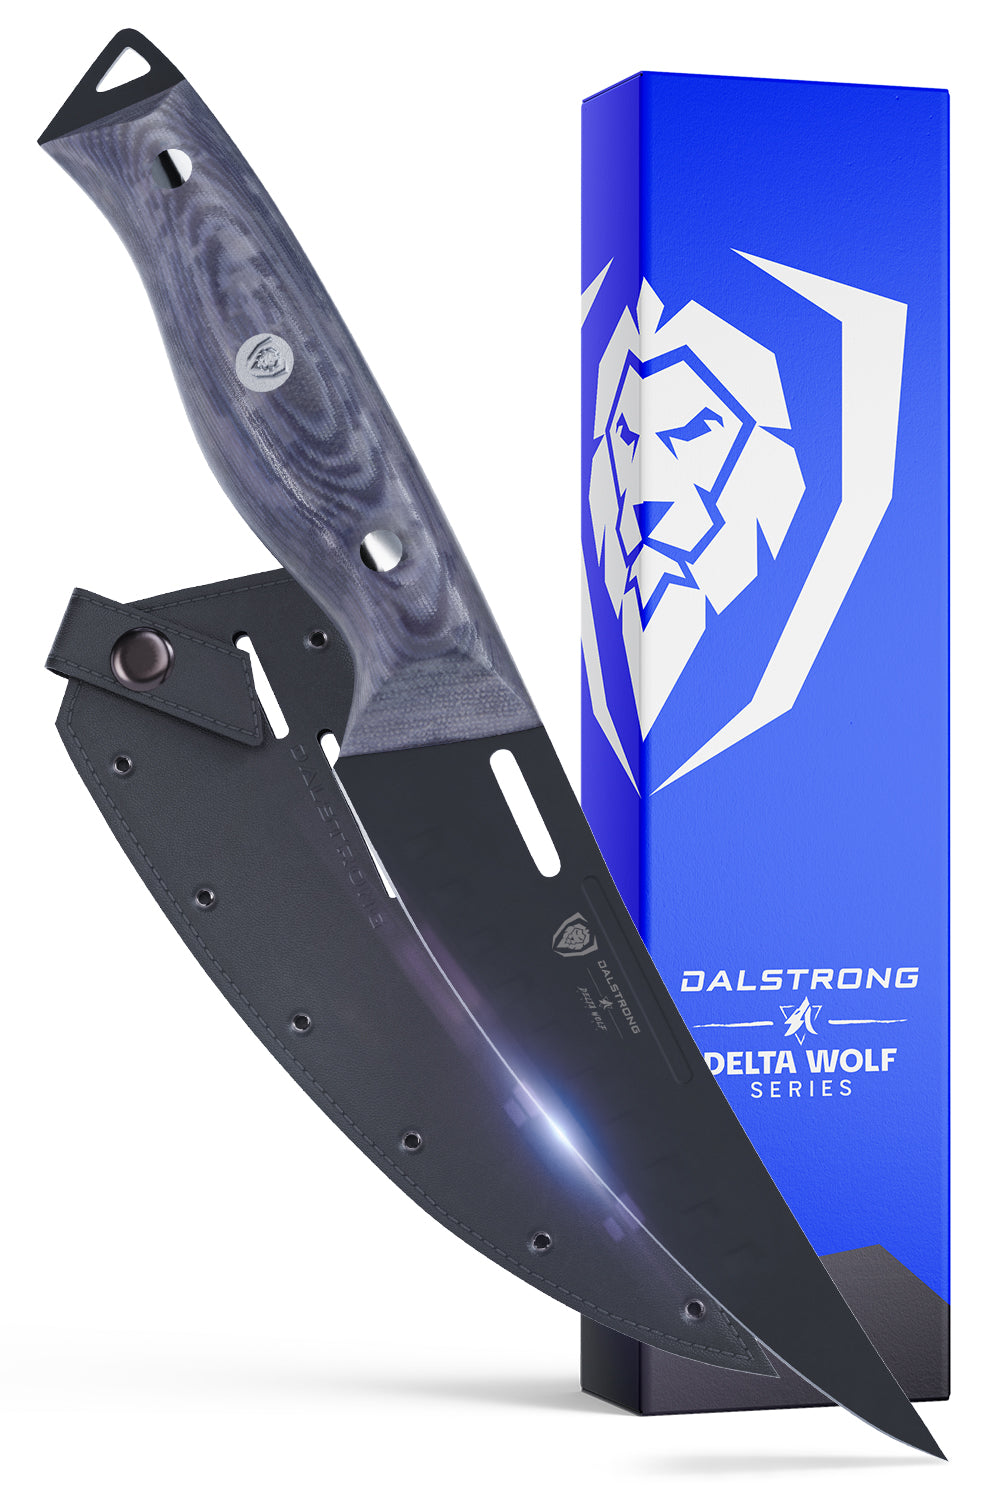 Dalstrong delta wolf series 6 inch curved fillet knife in front of it's premium packaging.